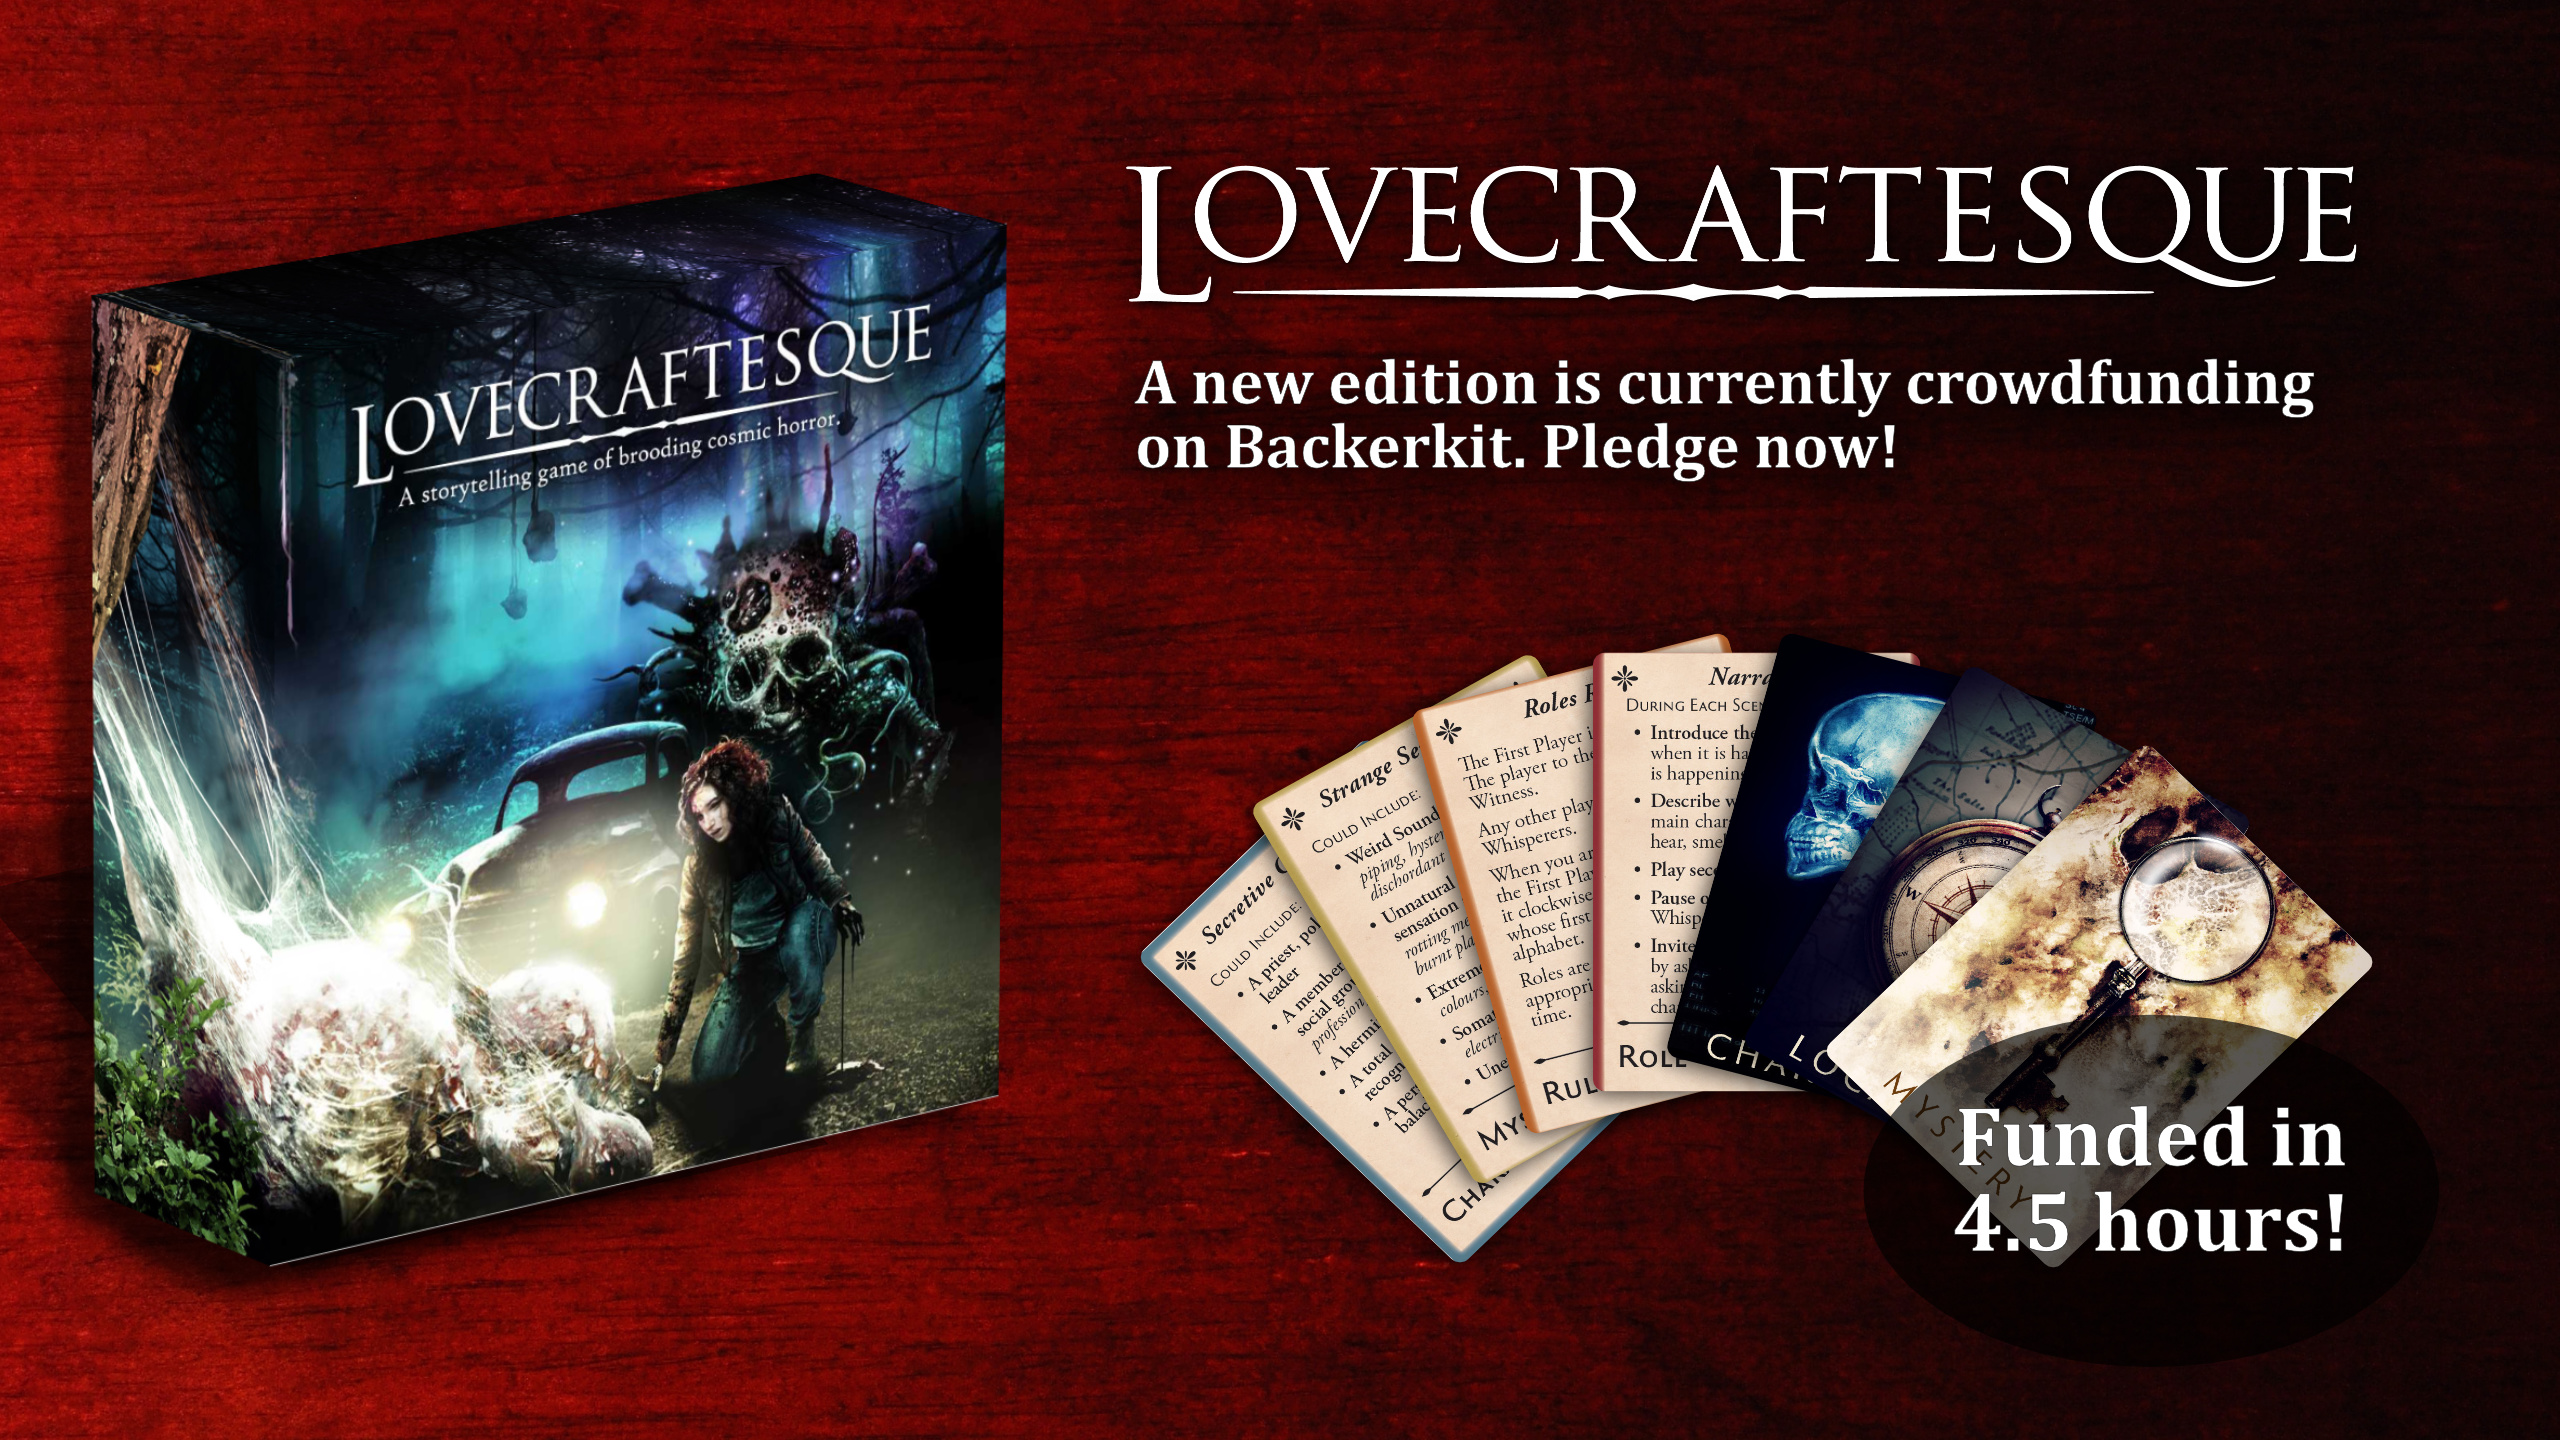 Lovecraftesque: a new edition is currently crowdfunding on Backerkit. Pledge now!